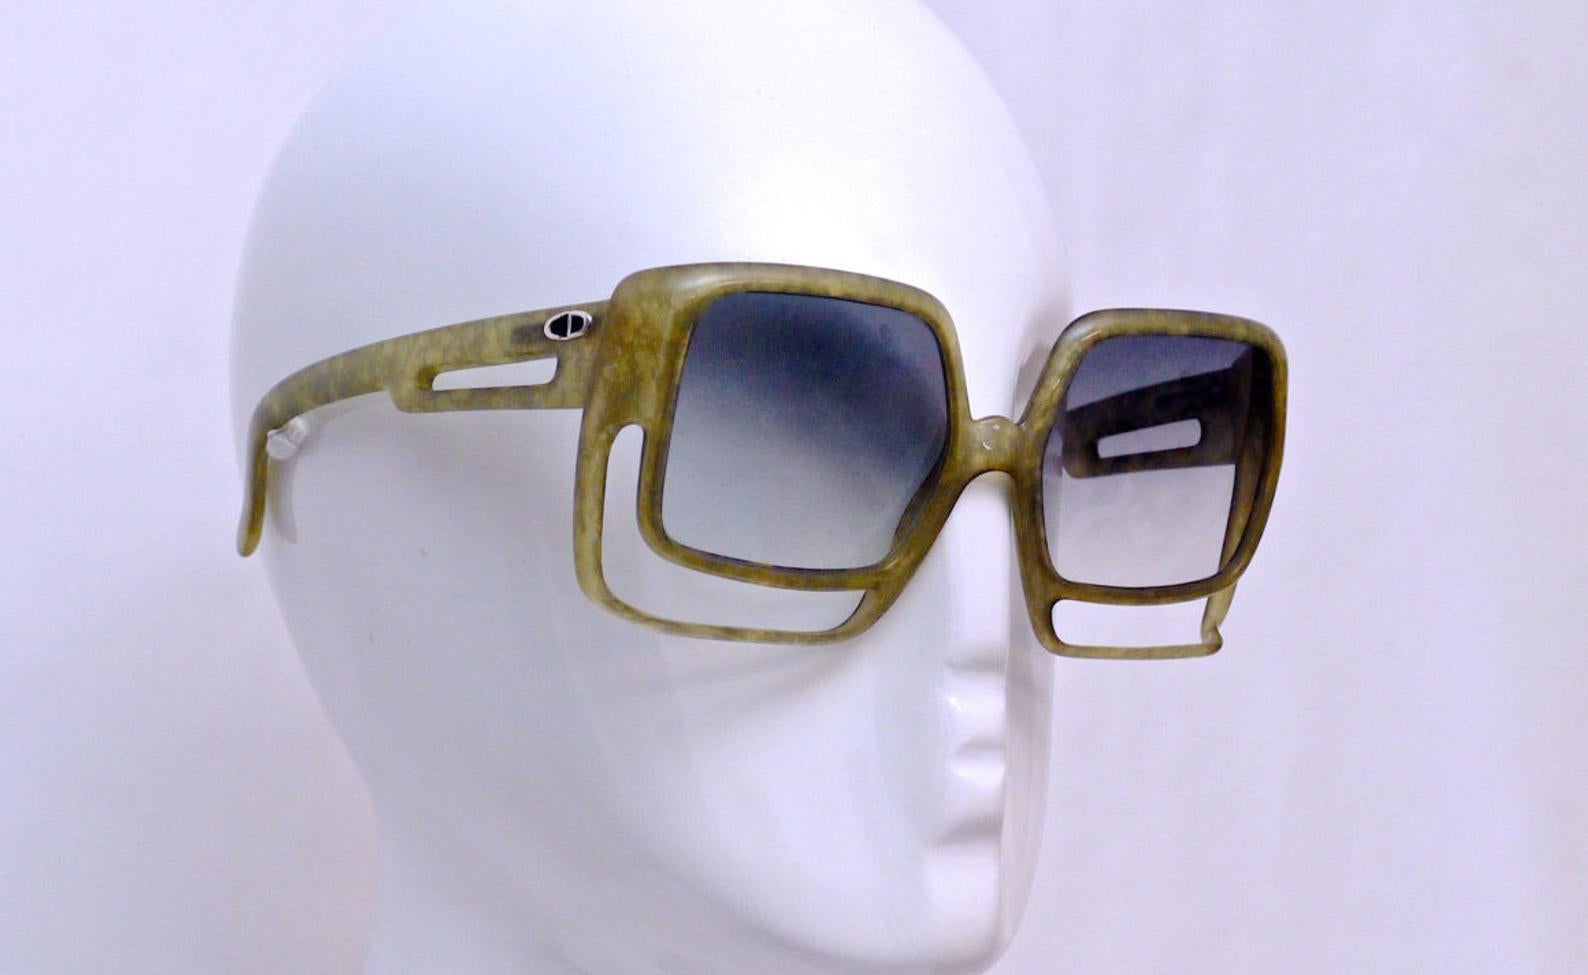 Vintage Oversize Christian Dior Space Age Green Sunglasses

Measurements:
Height: 2 5/8 inches
Horizontal Width: 6 inches
Temples: 5 inches

Features:
- 100% Authentic Vintage CHRISTIAN DIOR.
- Oversized space age sunglasses.
- Marbled olive green